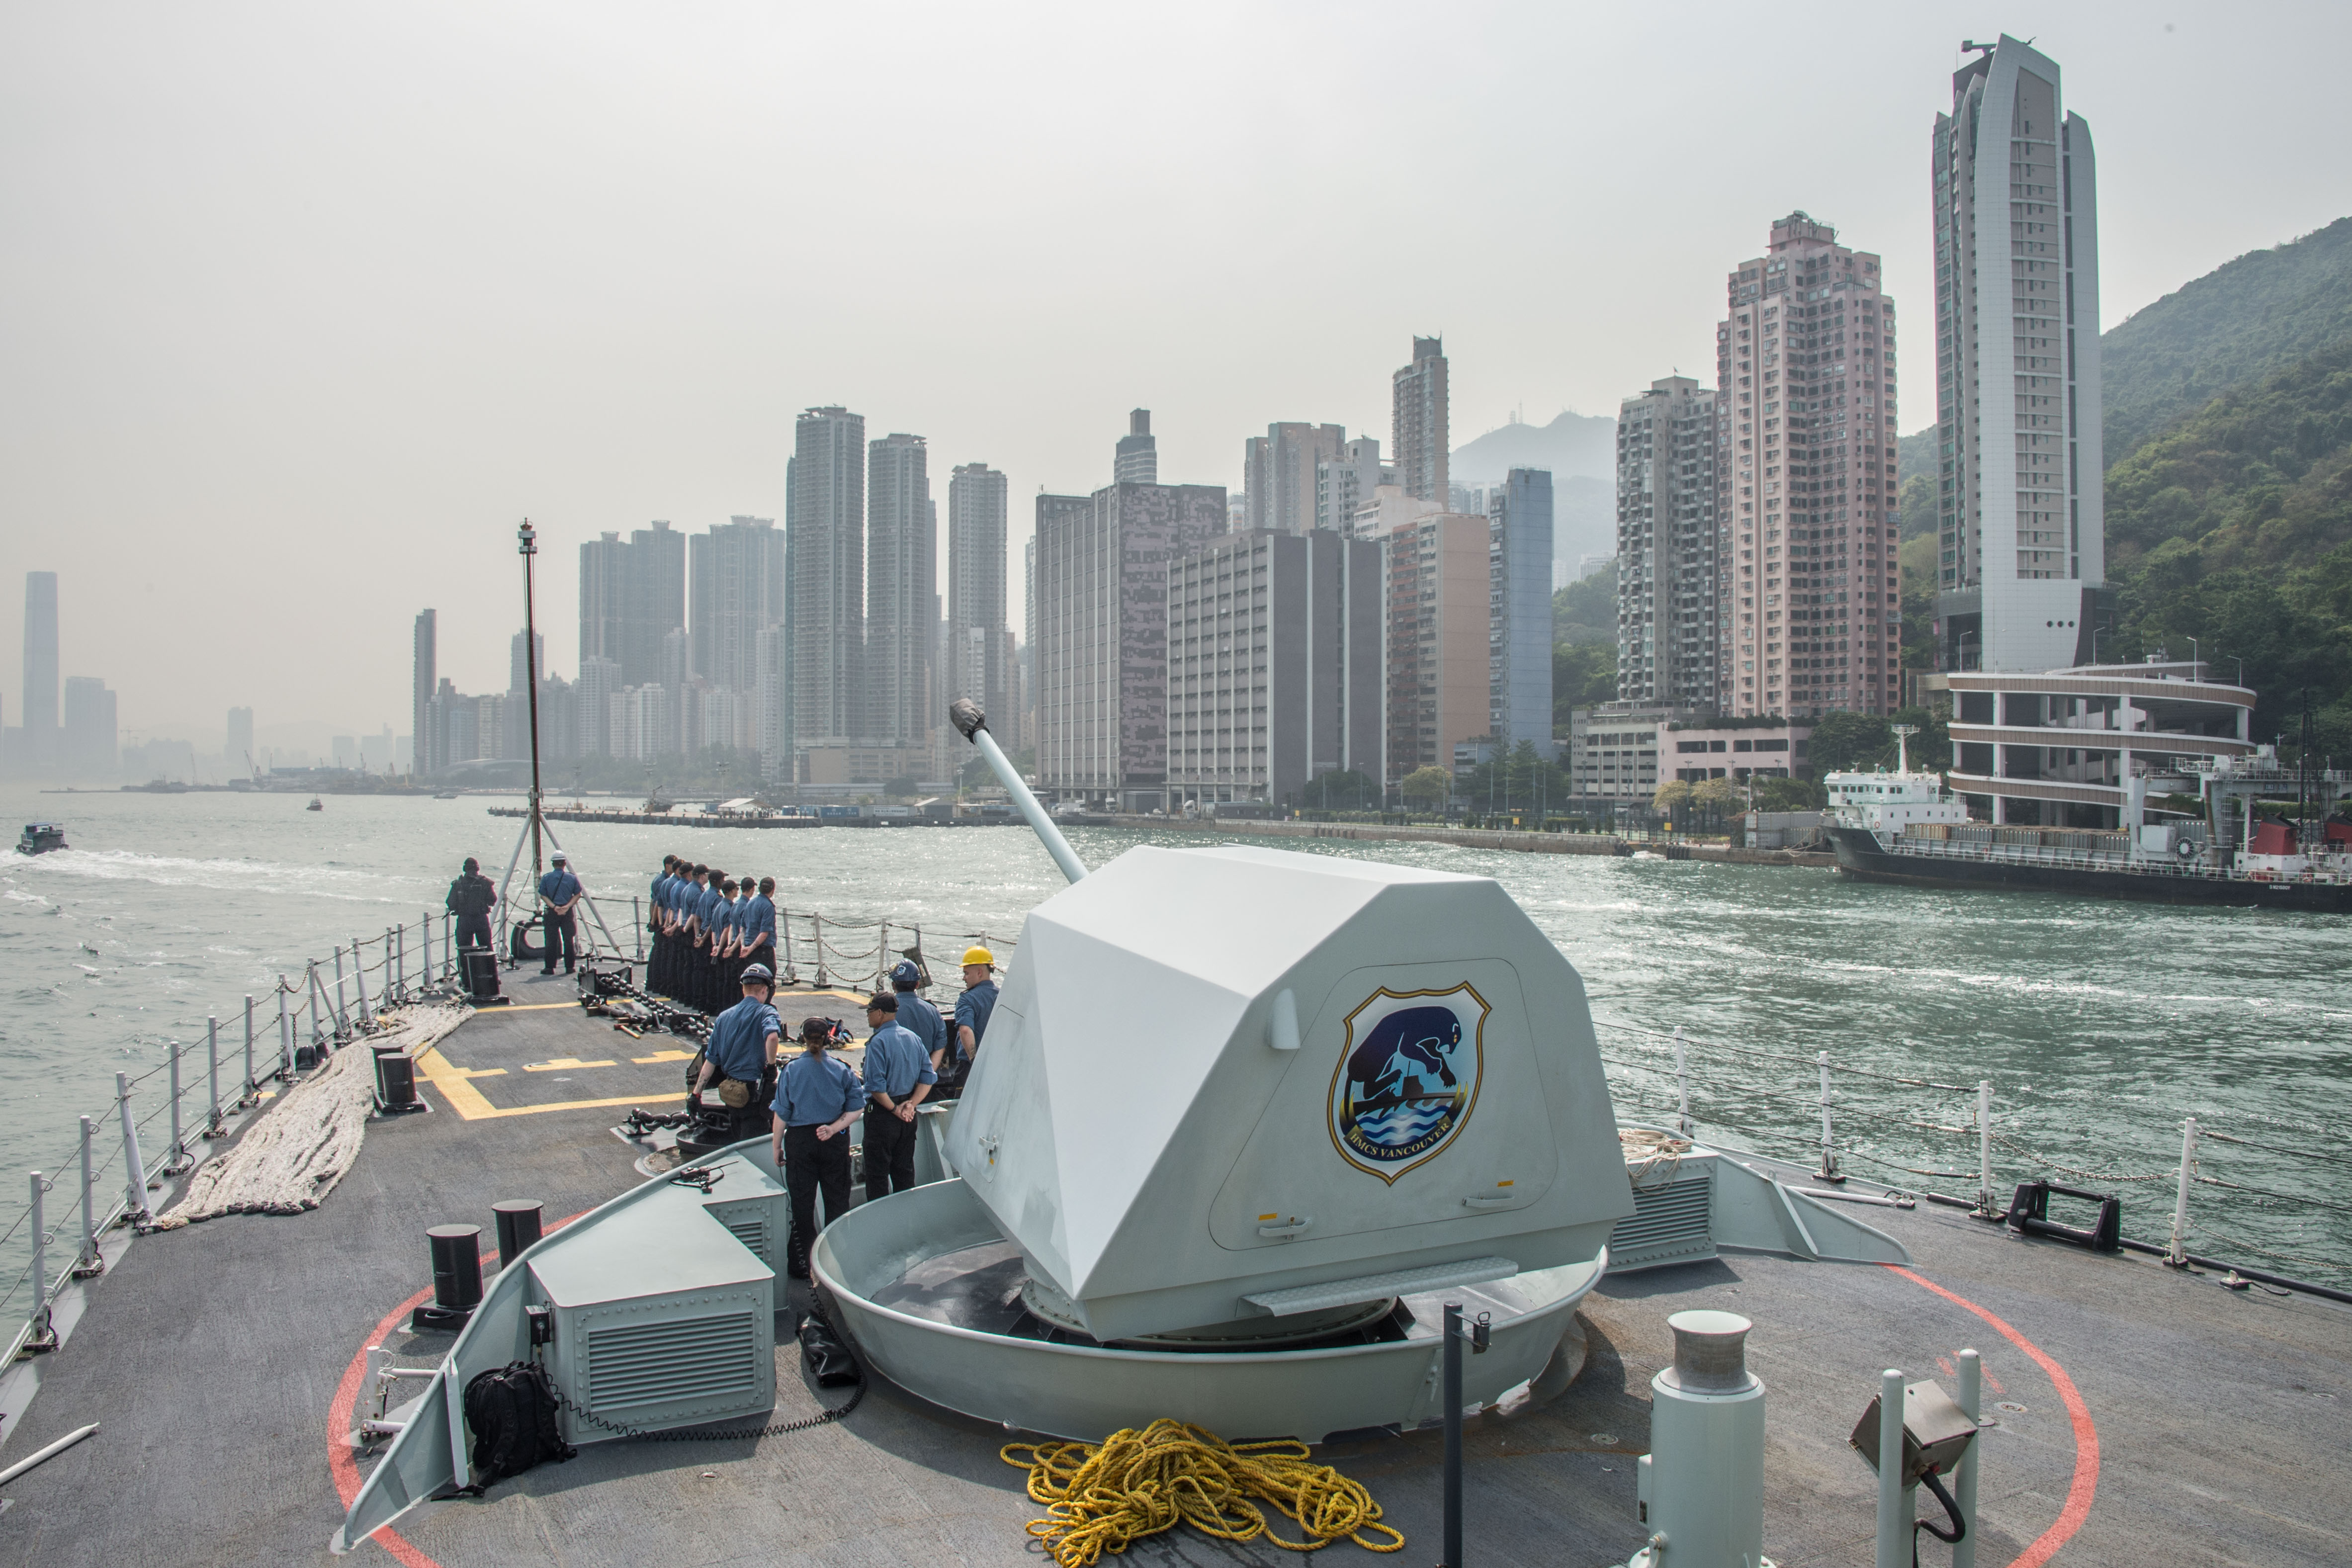 Her Majesty’s Canadian Ship (HMCS) VANCOUVER approaches the port of Hong Kong during Operation PROJECTION Indo-Asia Pacific on May 3, 2018. Photo: Master Corporal Brent Kenny, MARPAC Imaging Services ET01-2018-0150-037 